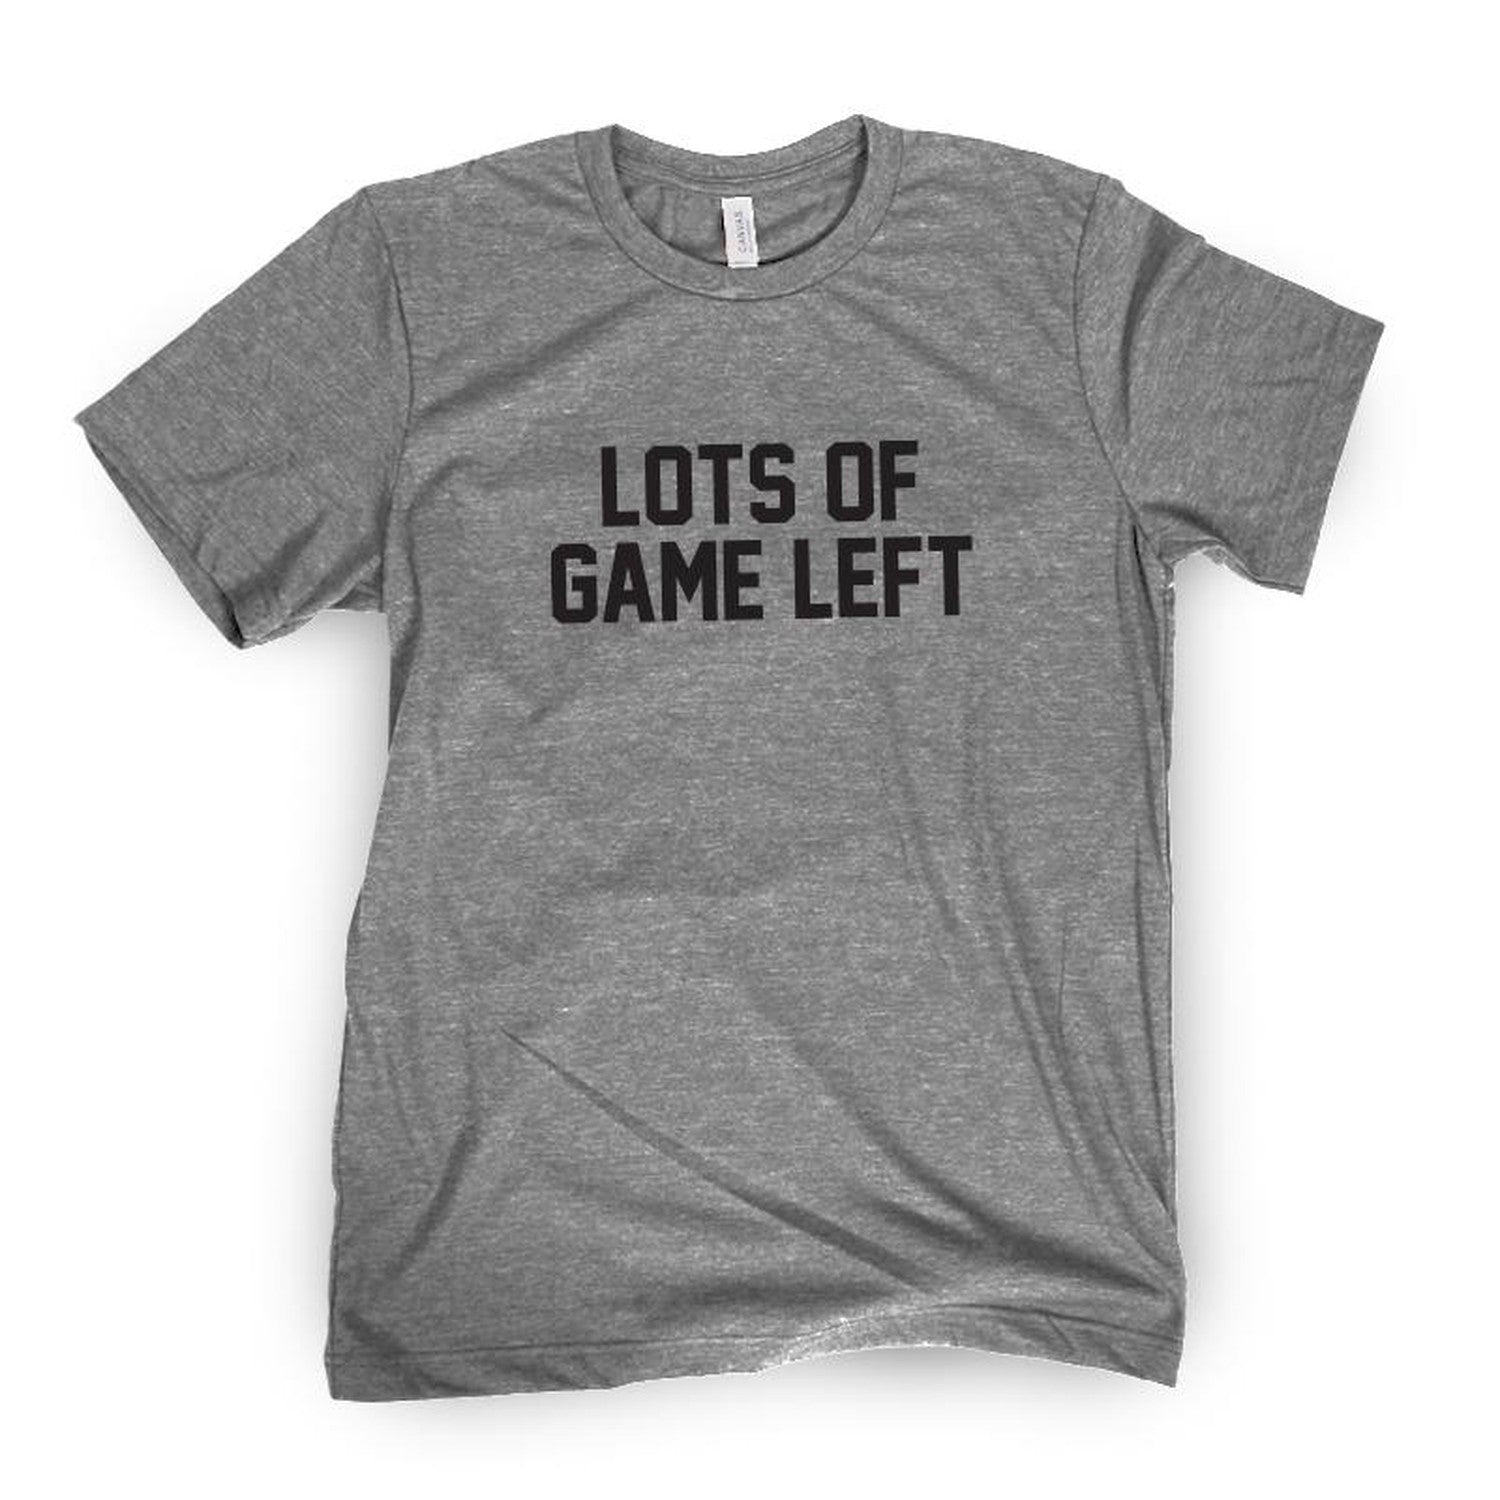 Lots Of Game Left Tee